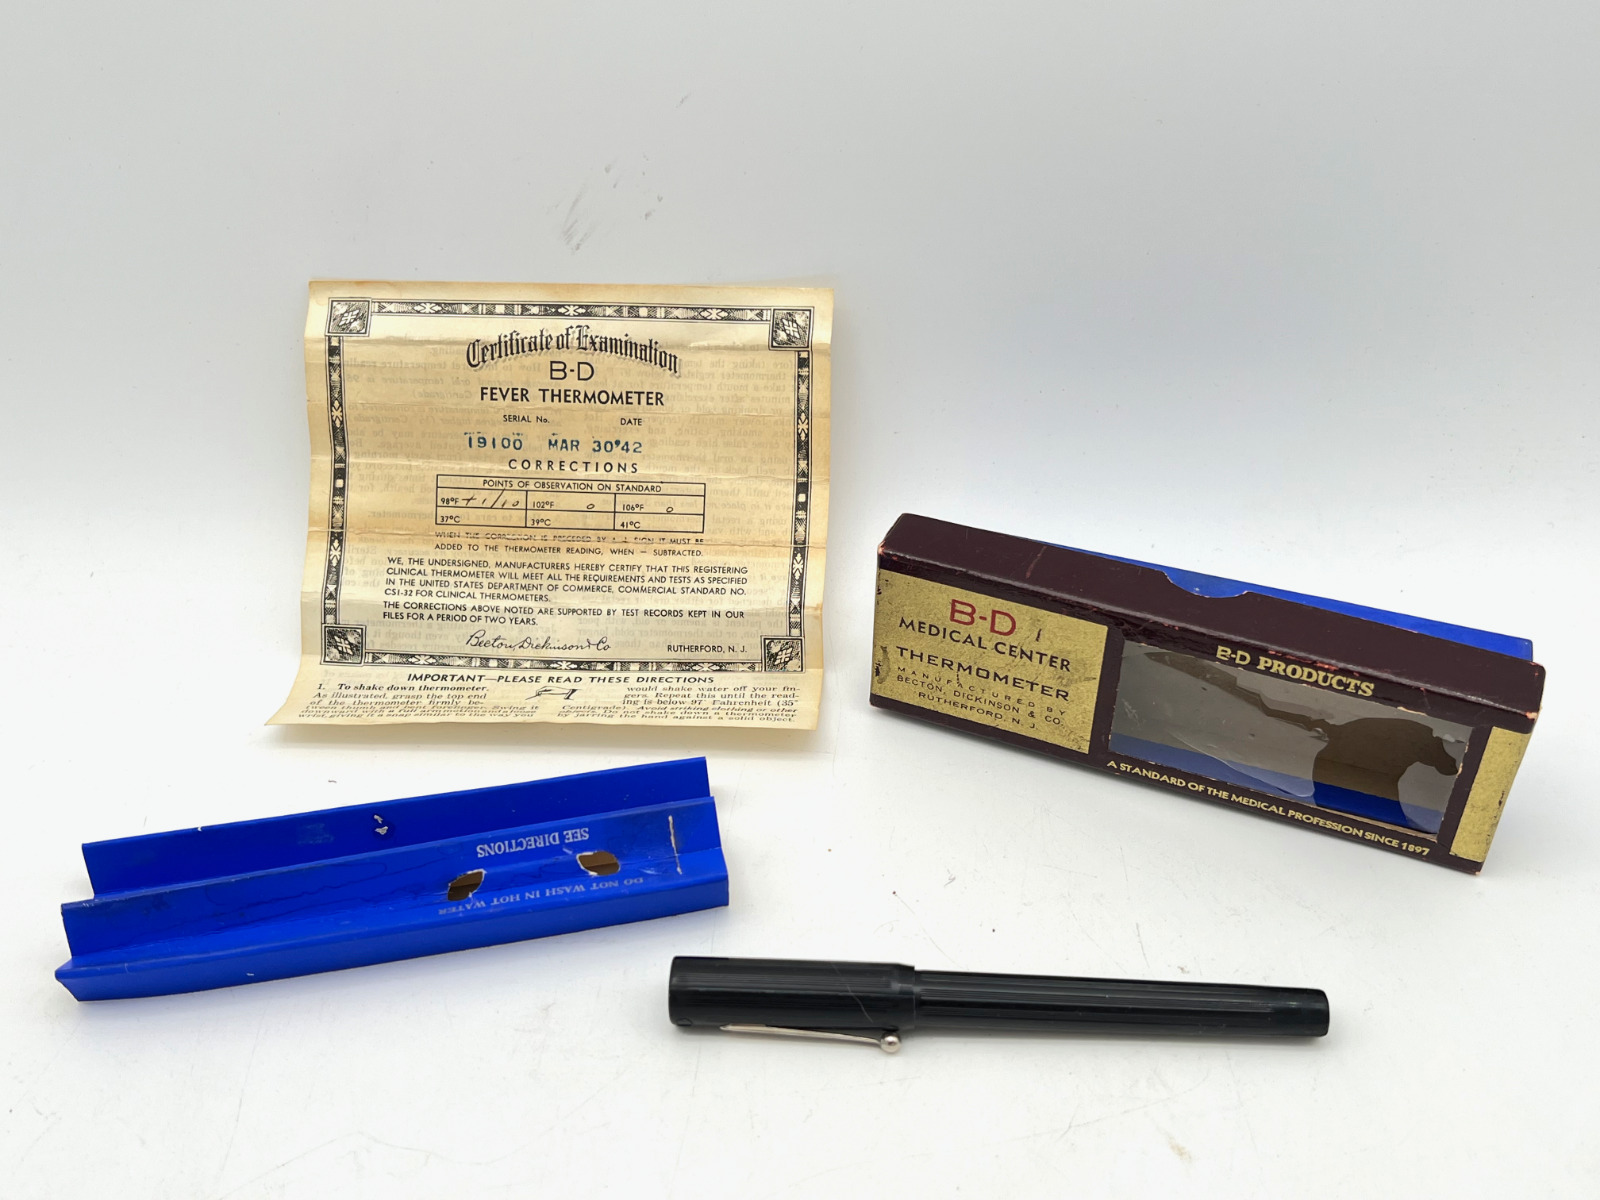 Vintage Becton Dickinson & Co. BD B-D Medical Center Thermometer w/ Case & Box